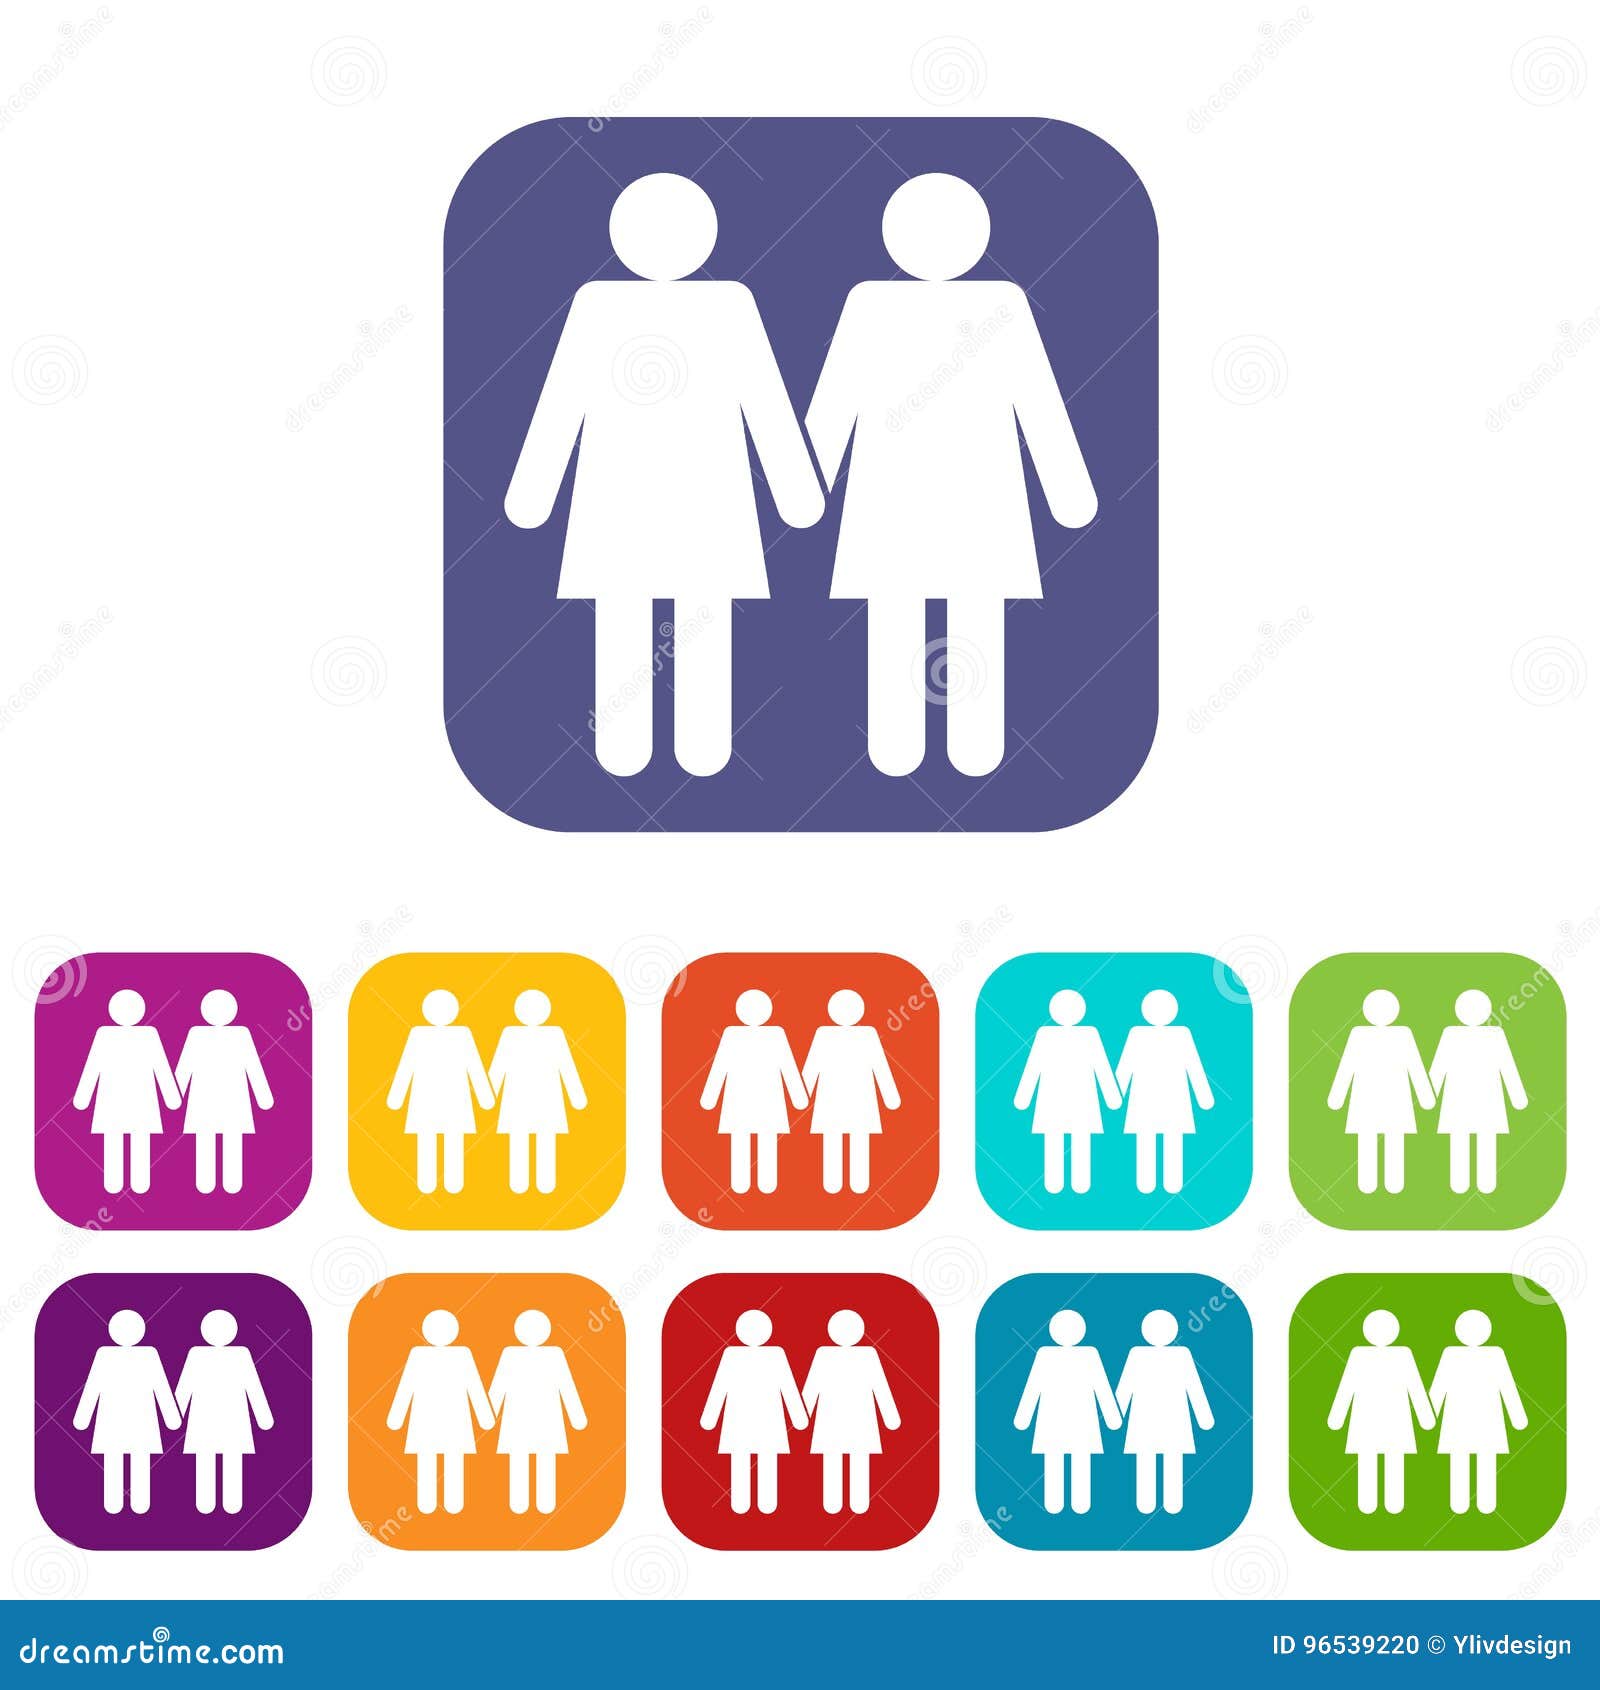 Two Girls Lesbians Icons Set Stock Vector Illustration Of Flat Object 96539220